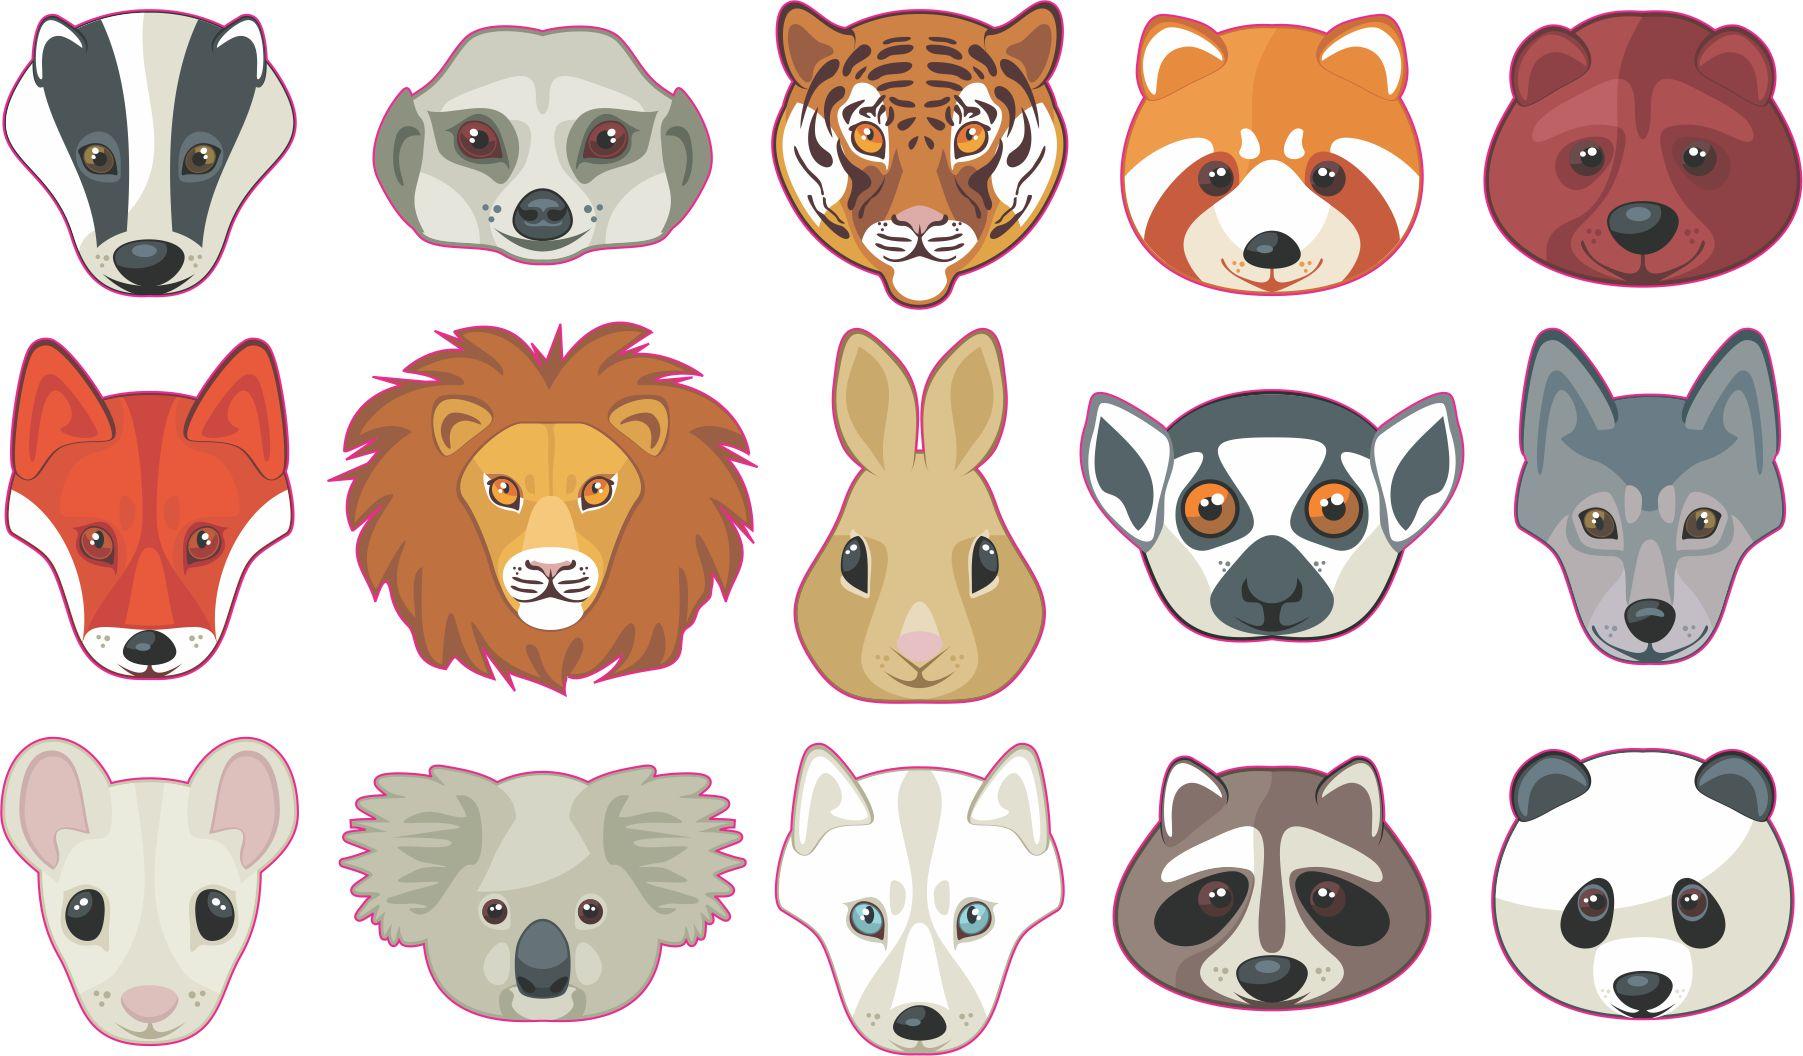 15x Small Animal Head Vinyl Stickers and Decals